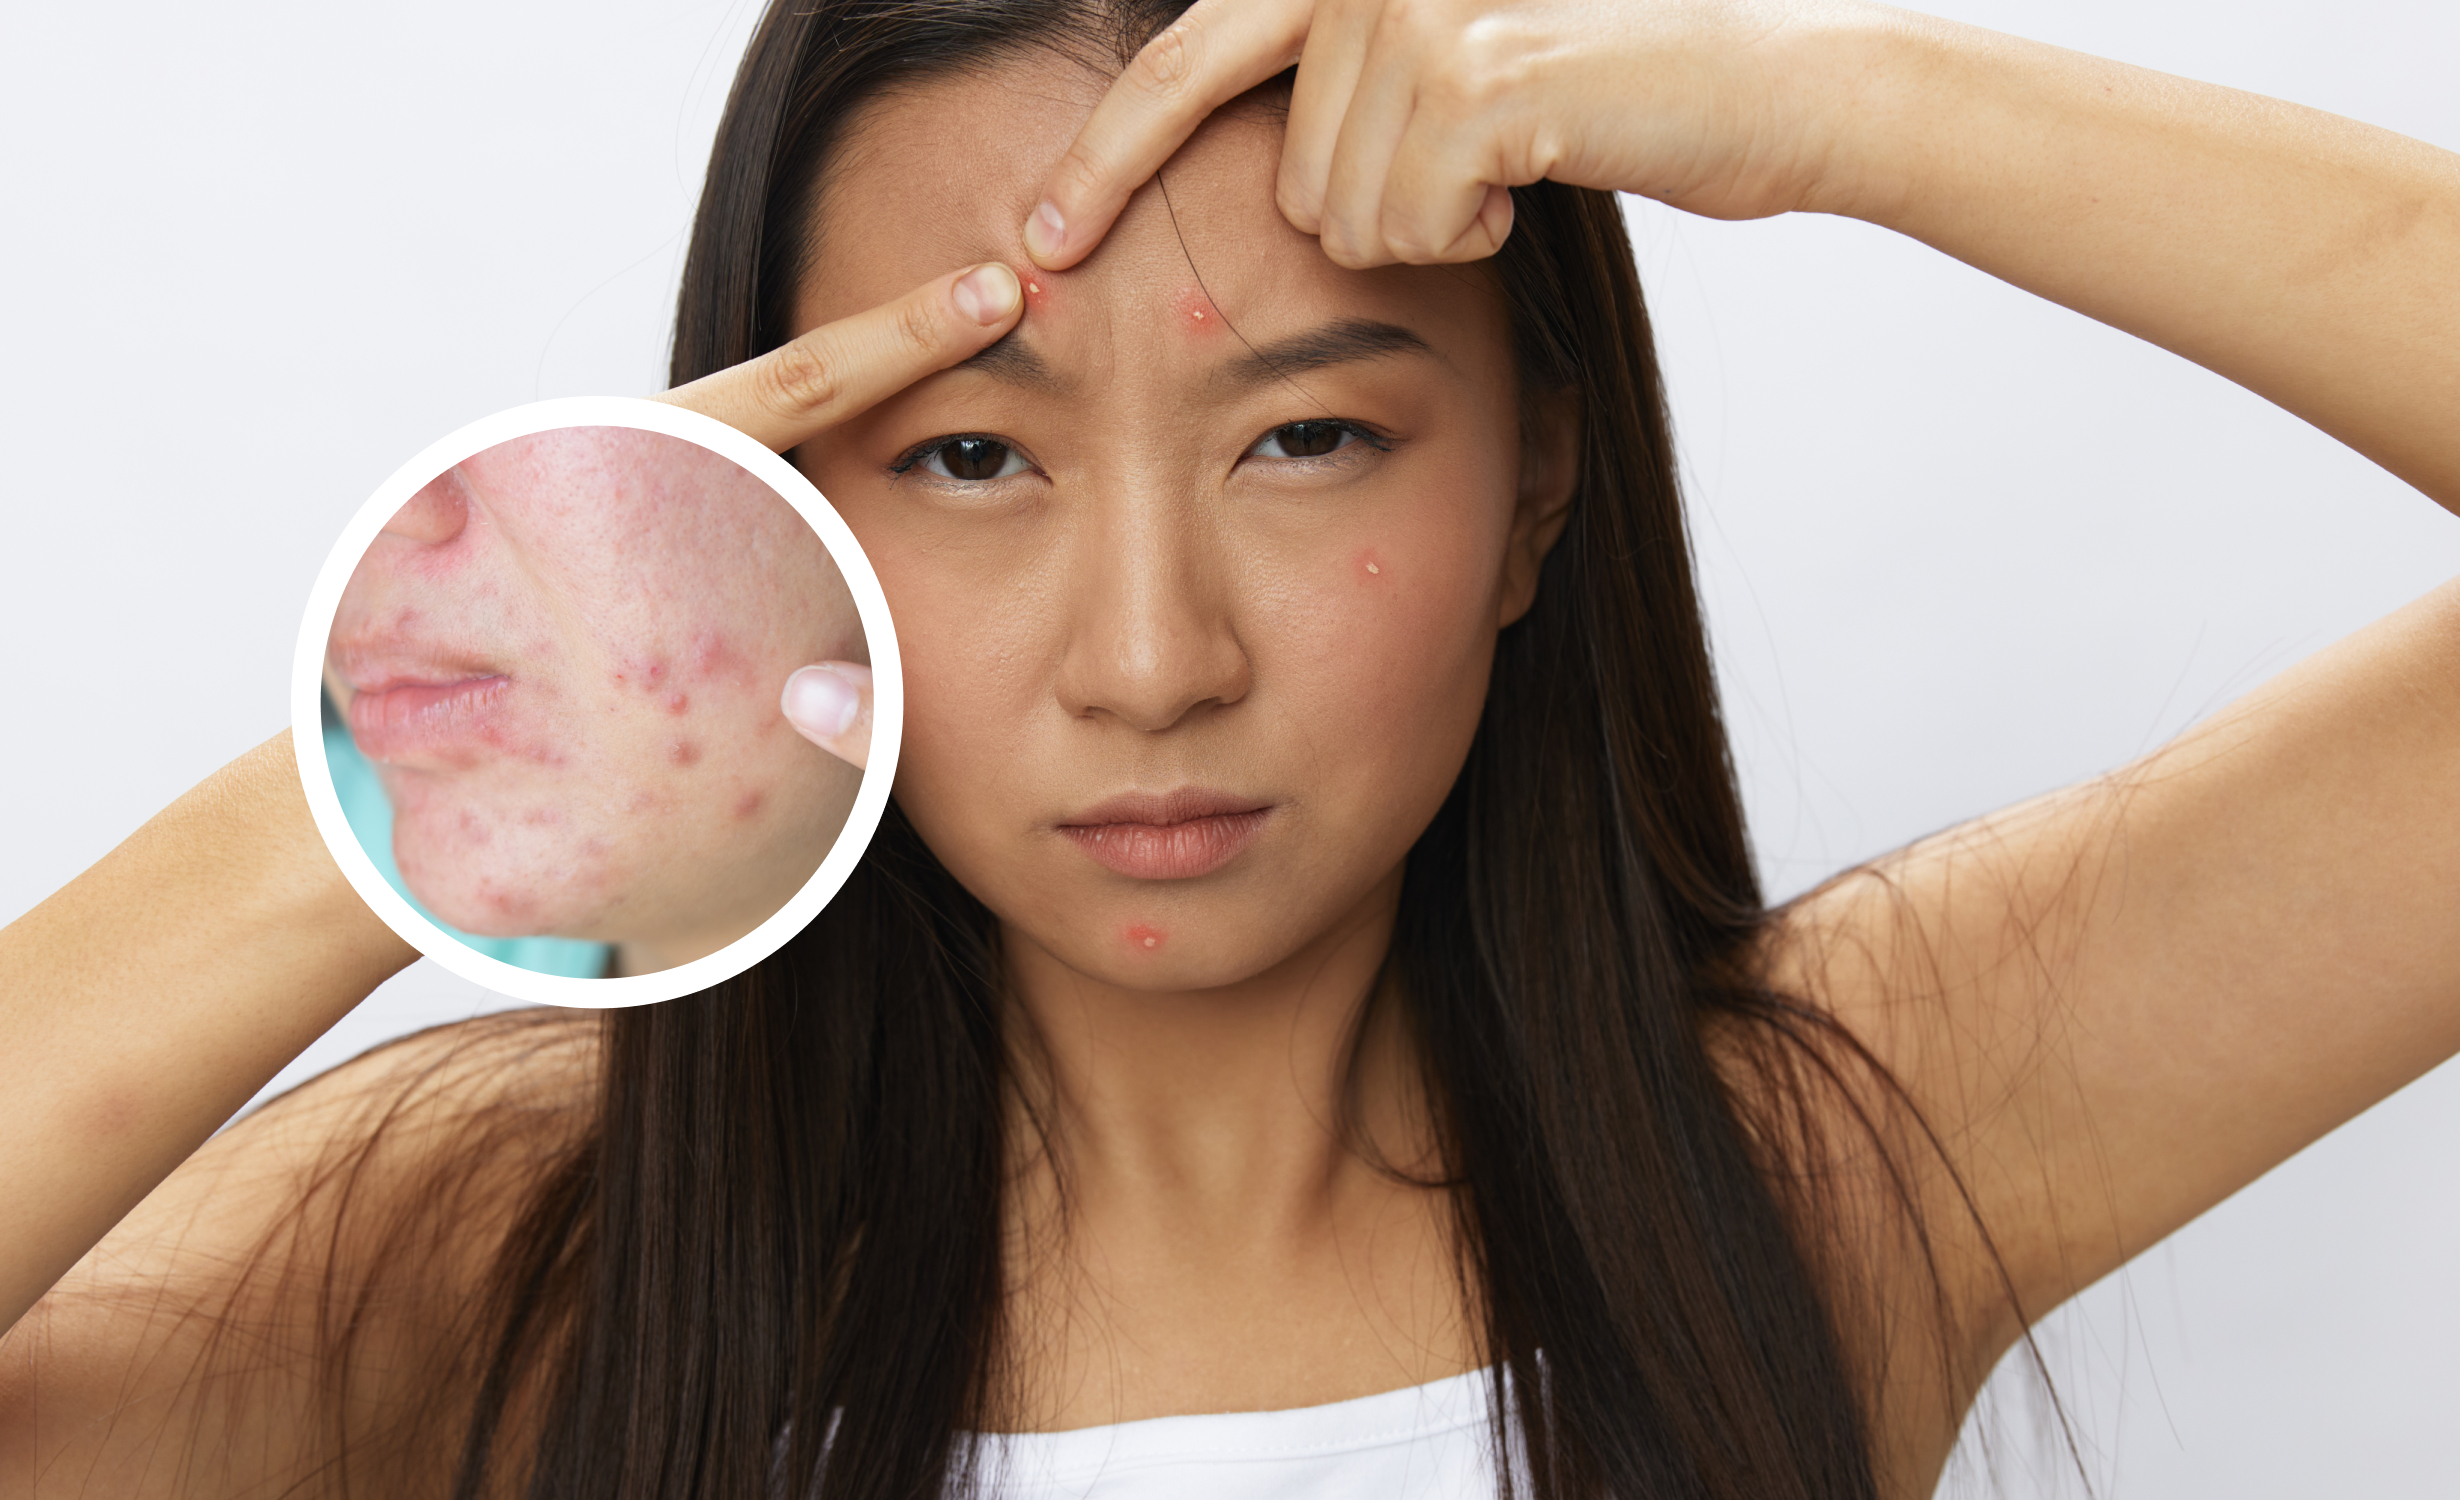 A young woman with a frustrated expression points to acne scars on her forehead. An inset magnifies a section of the skin, highlighting the acne scars and blemishes.